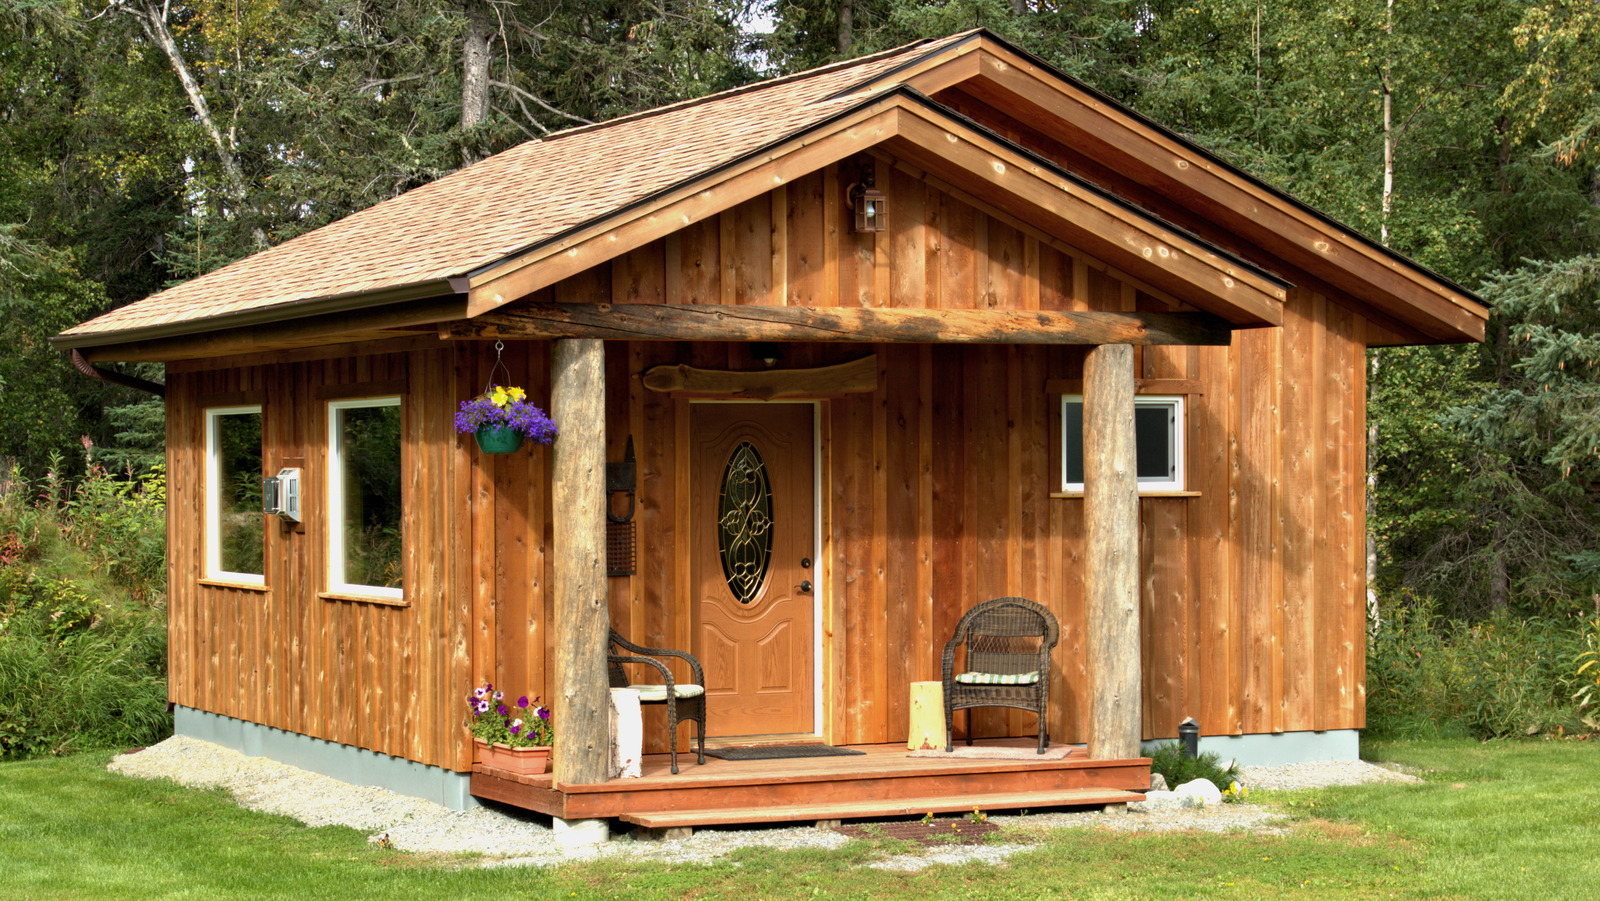 https://www.housedigest.com/img/gallery/how-to-turn-your-backyard-shed-into-a-tiny-home/l-intro-1649428833.jpg